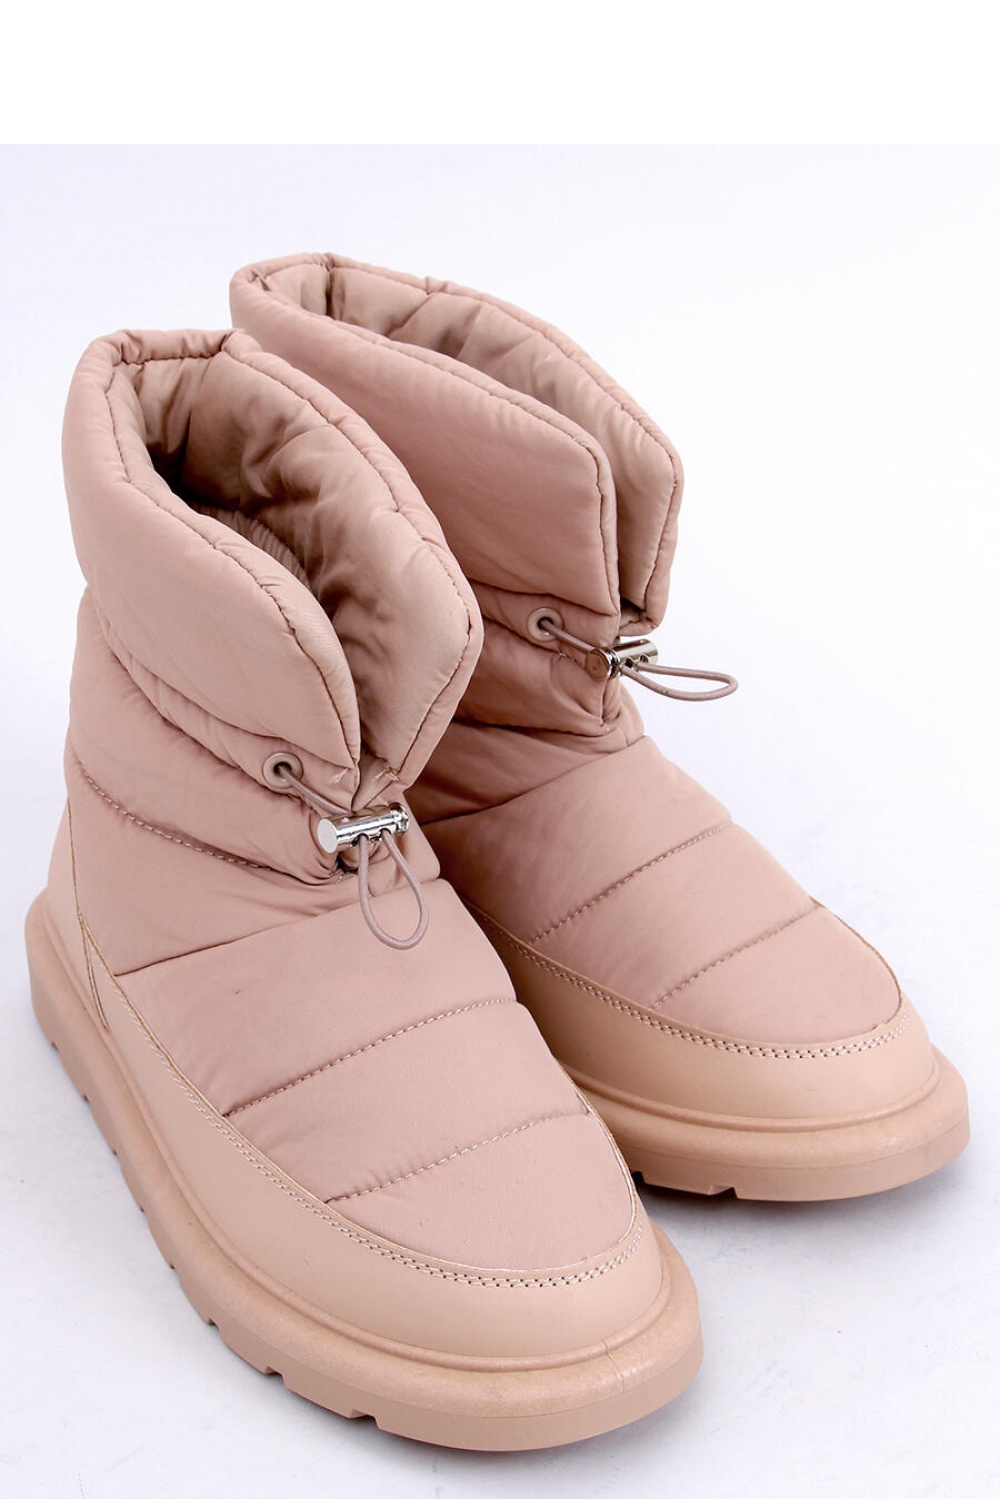  Snow boots model 172854 Inello  brown